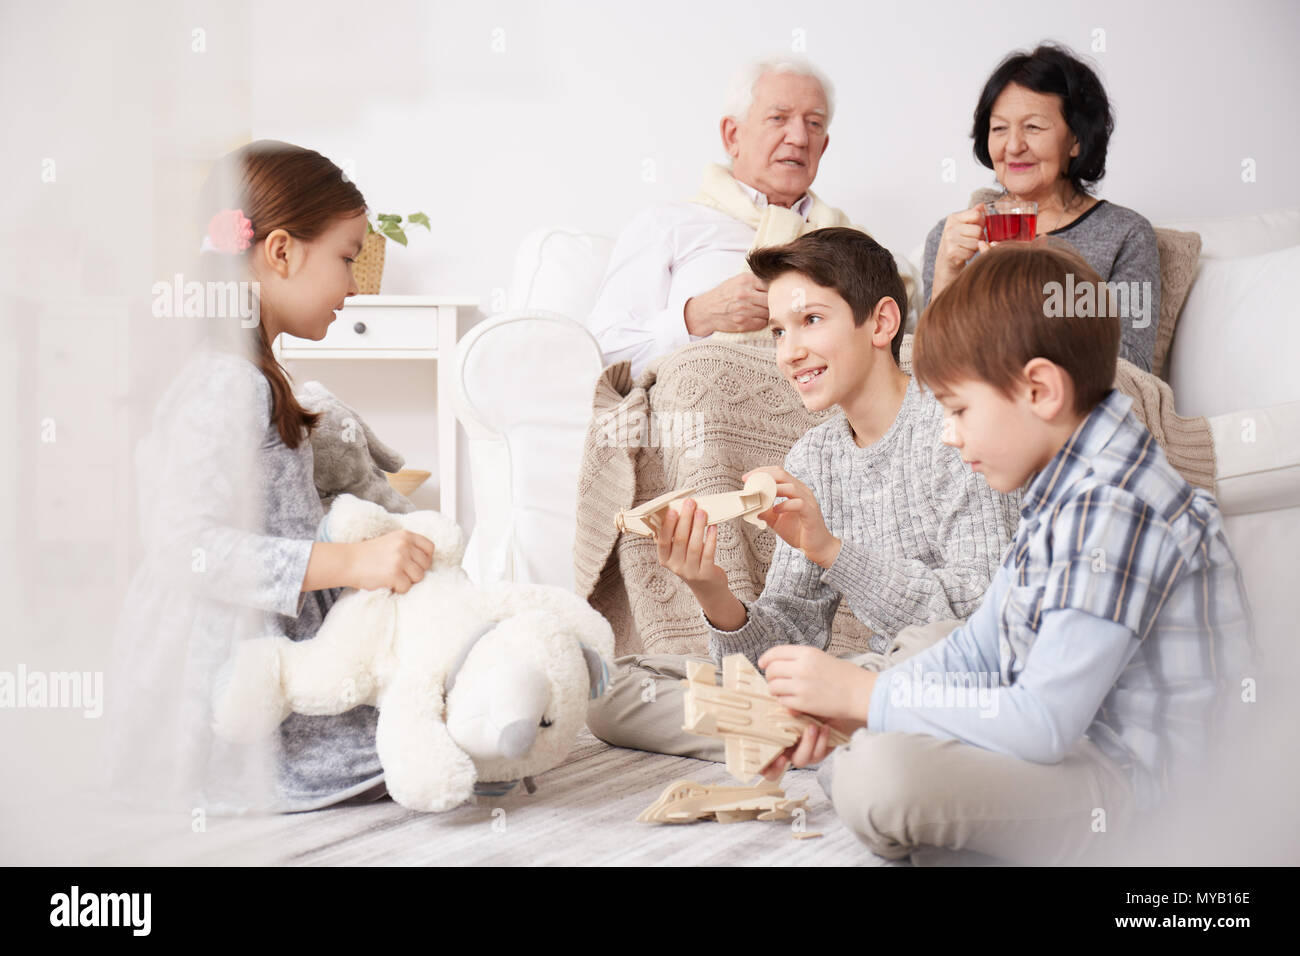 Children playing on a floor and their grandparents sitting on a sofa Stock Photo